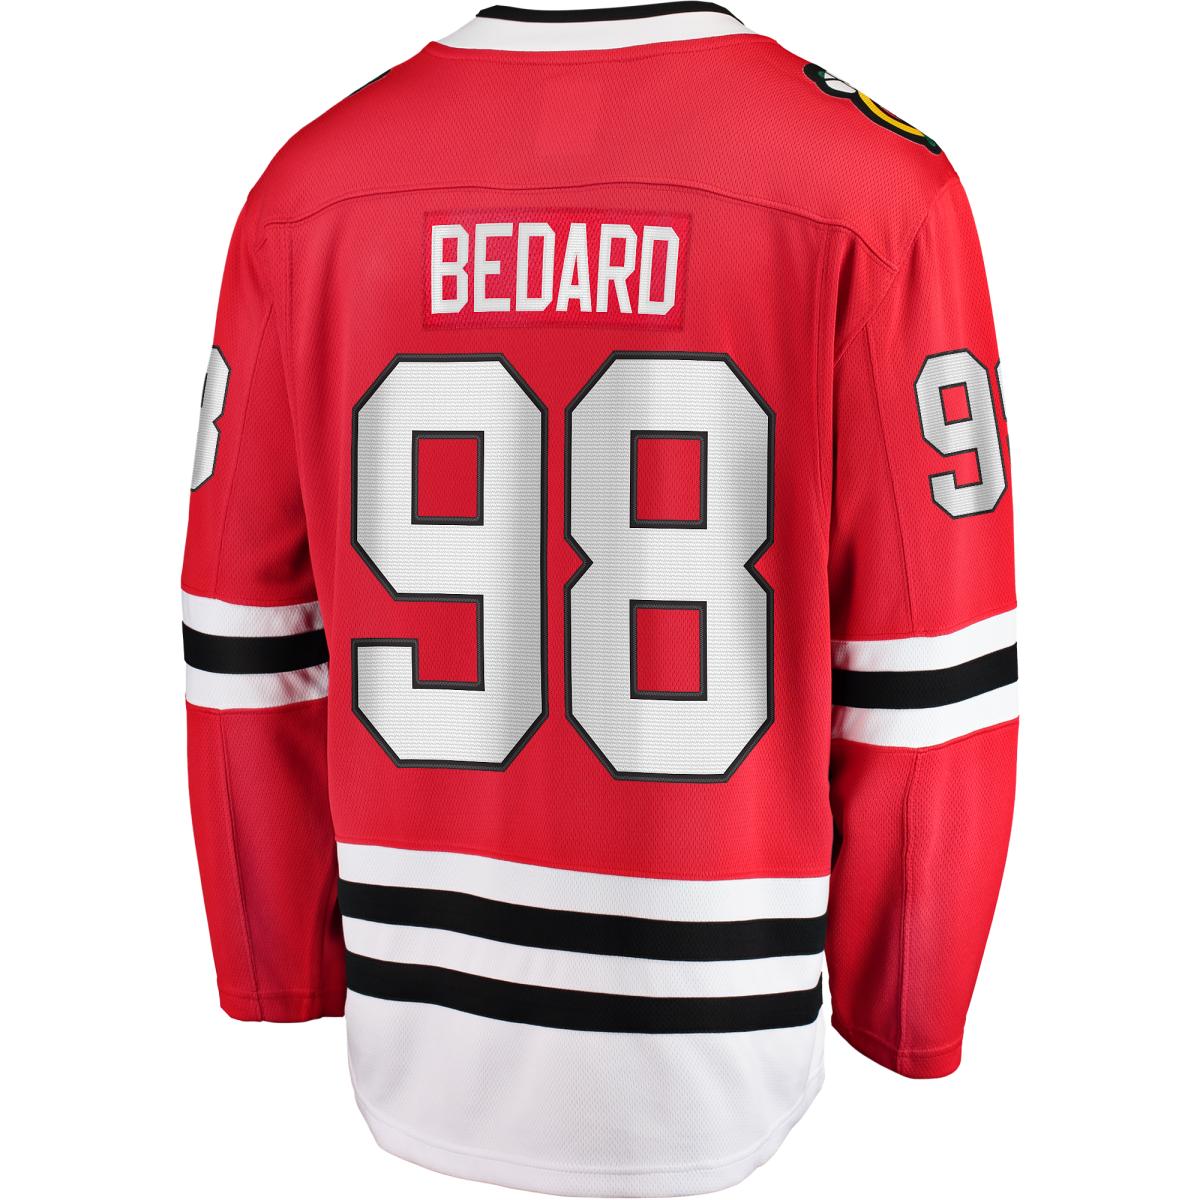 NHL Jerseys, NHL Apparel & Gear at The Official Online Store of the NHL